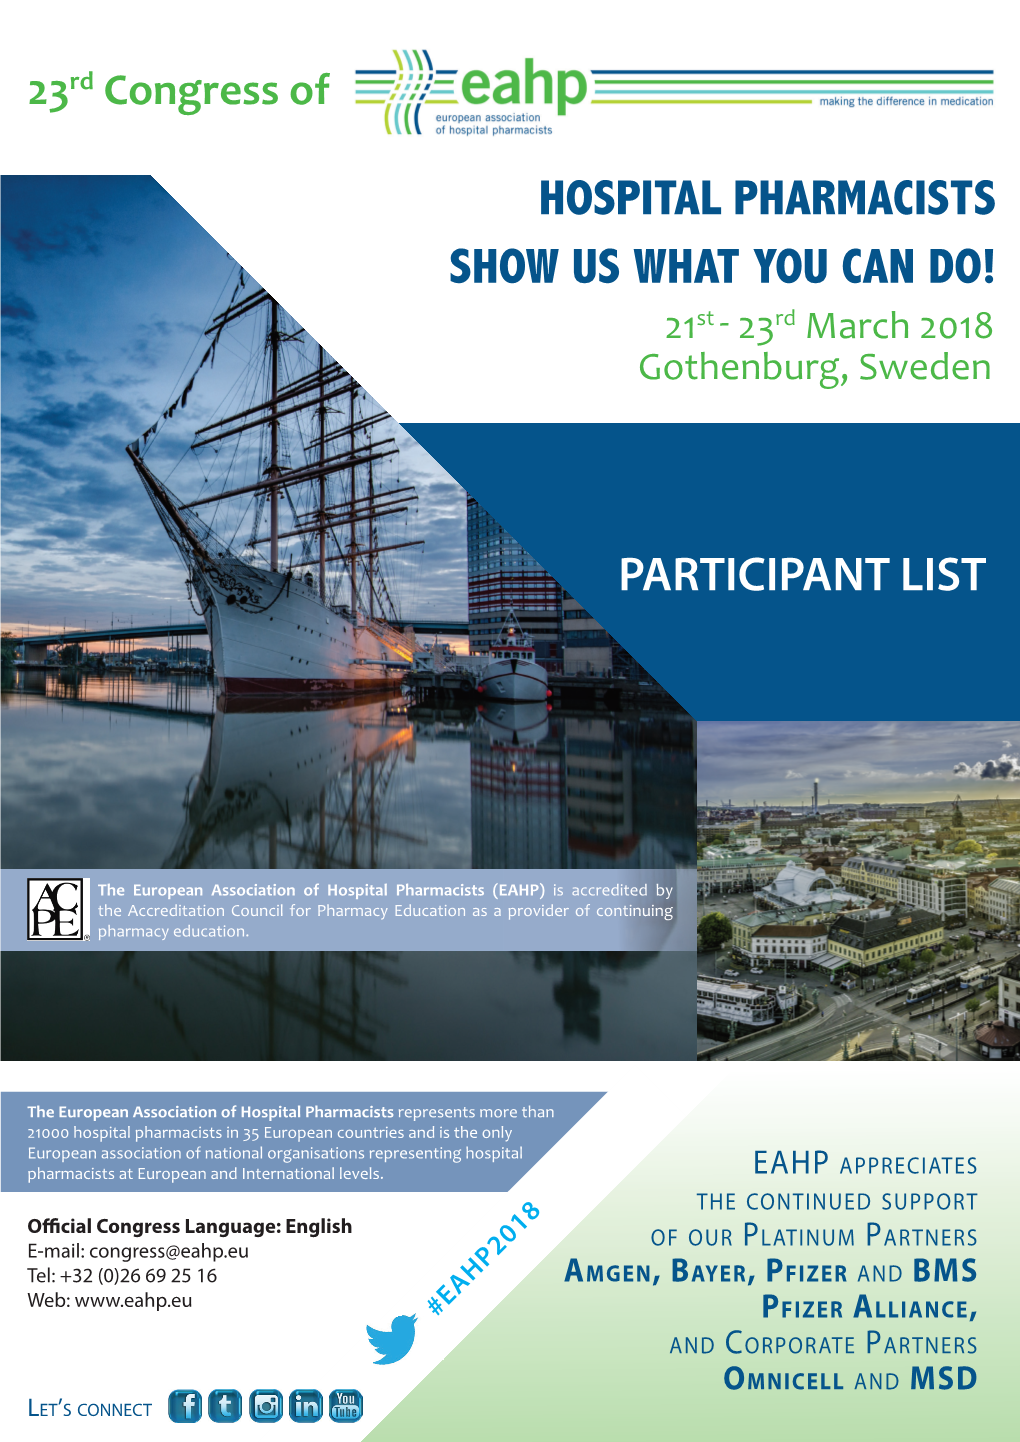 HOSPITAL PHARMACISTS SHOW US WHAT YOU CAN DO! 21St - 23Rd March 2018 Gothenburg, Sweden